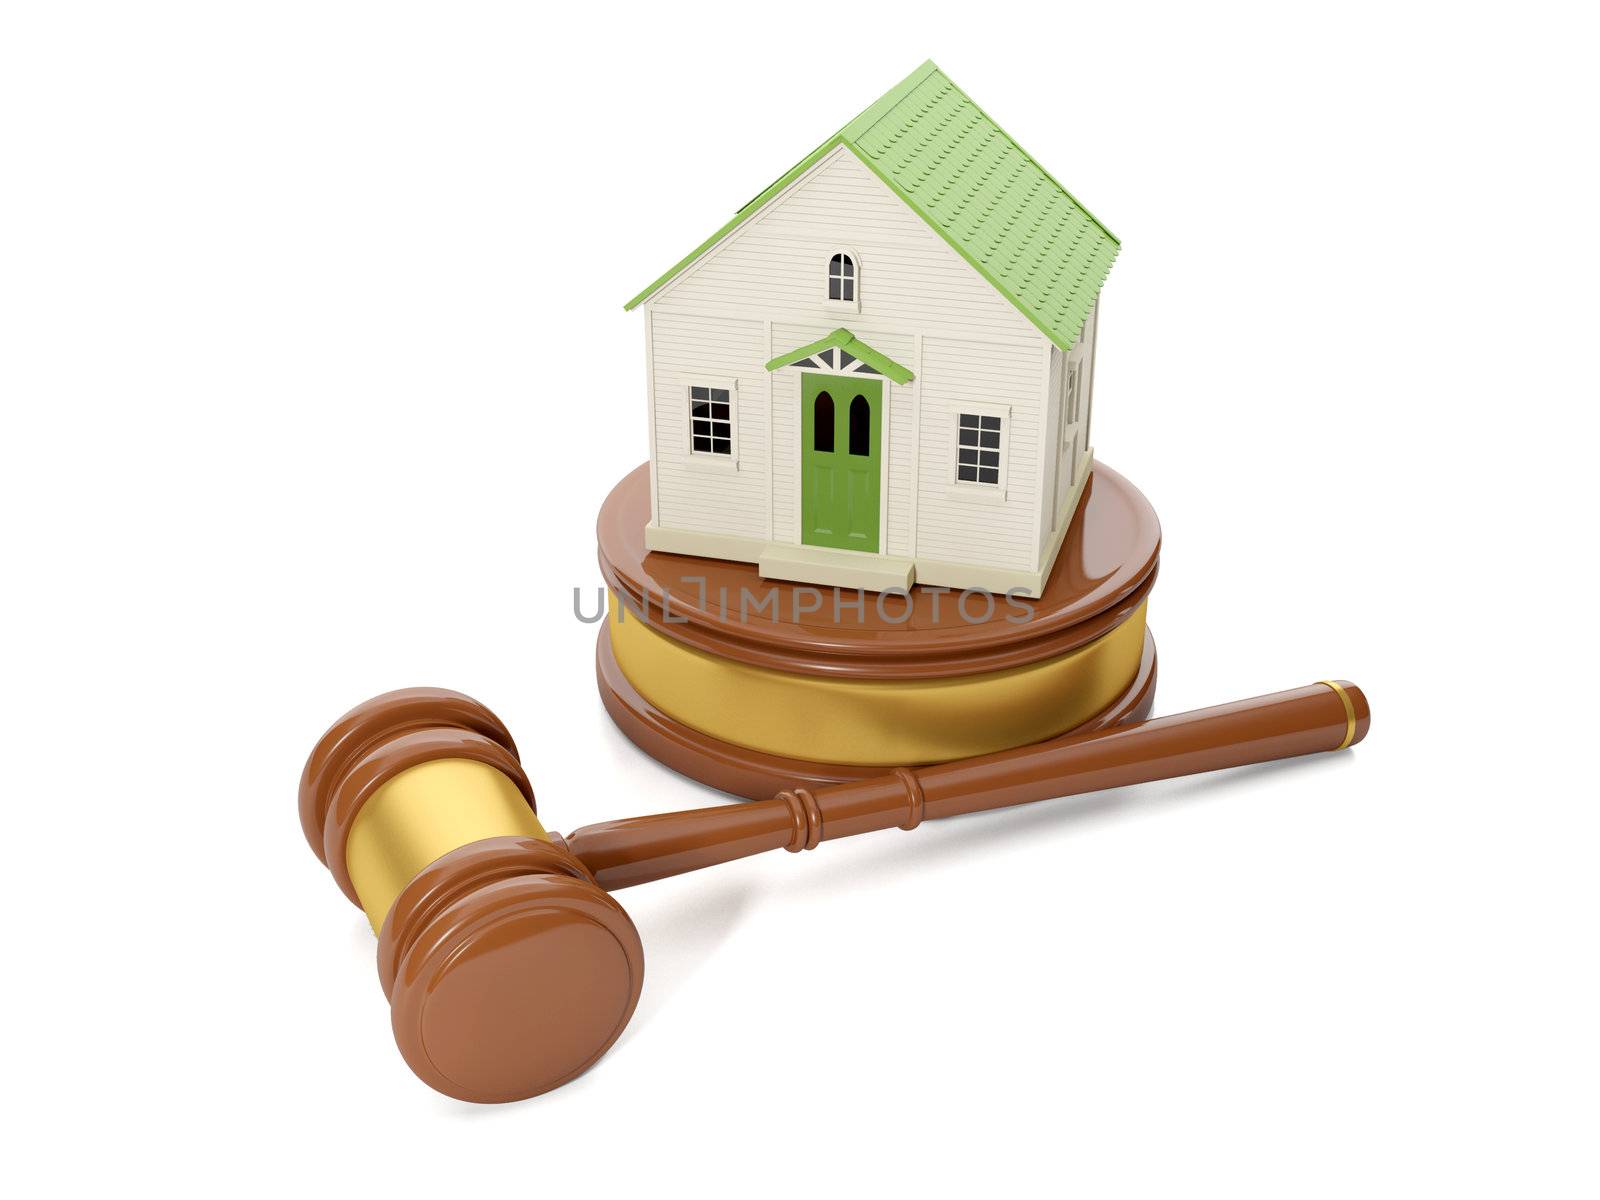 3d illustration: Legal assistance. Address issues related to real estate